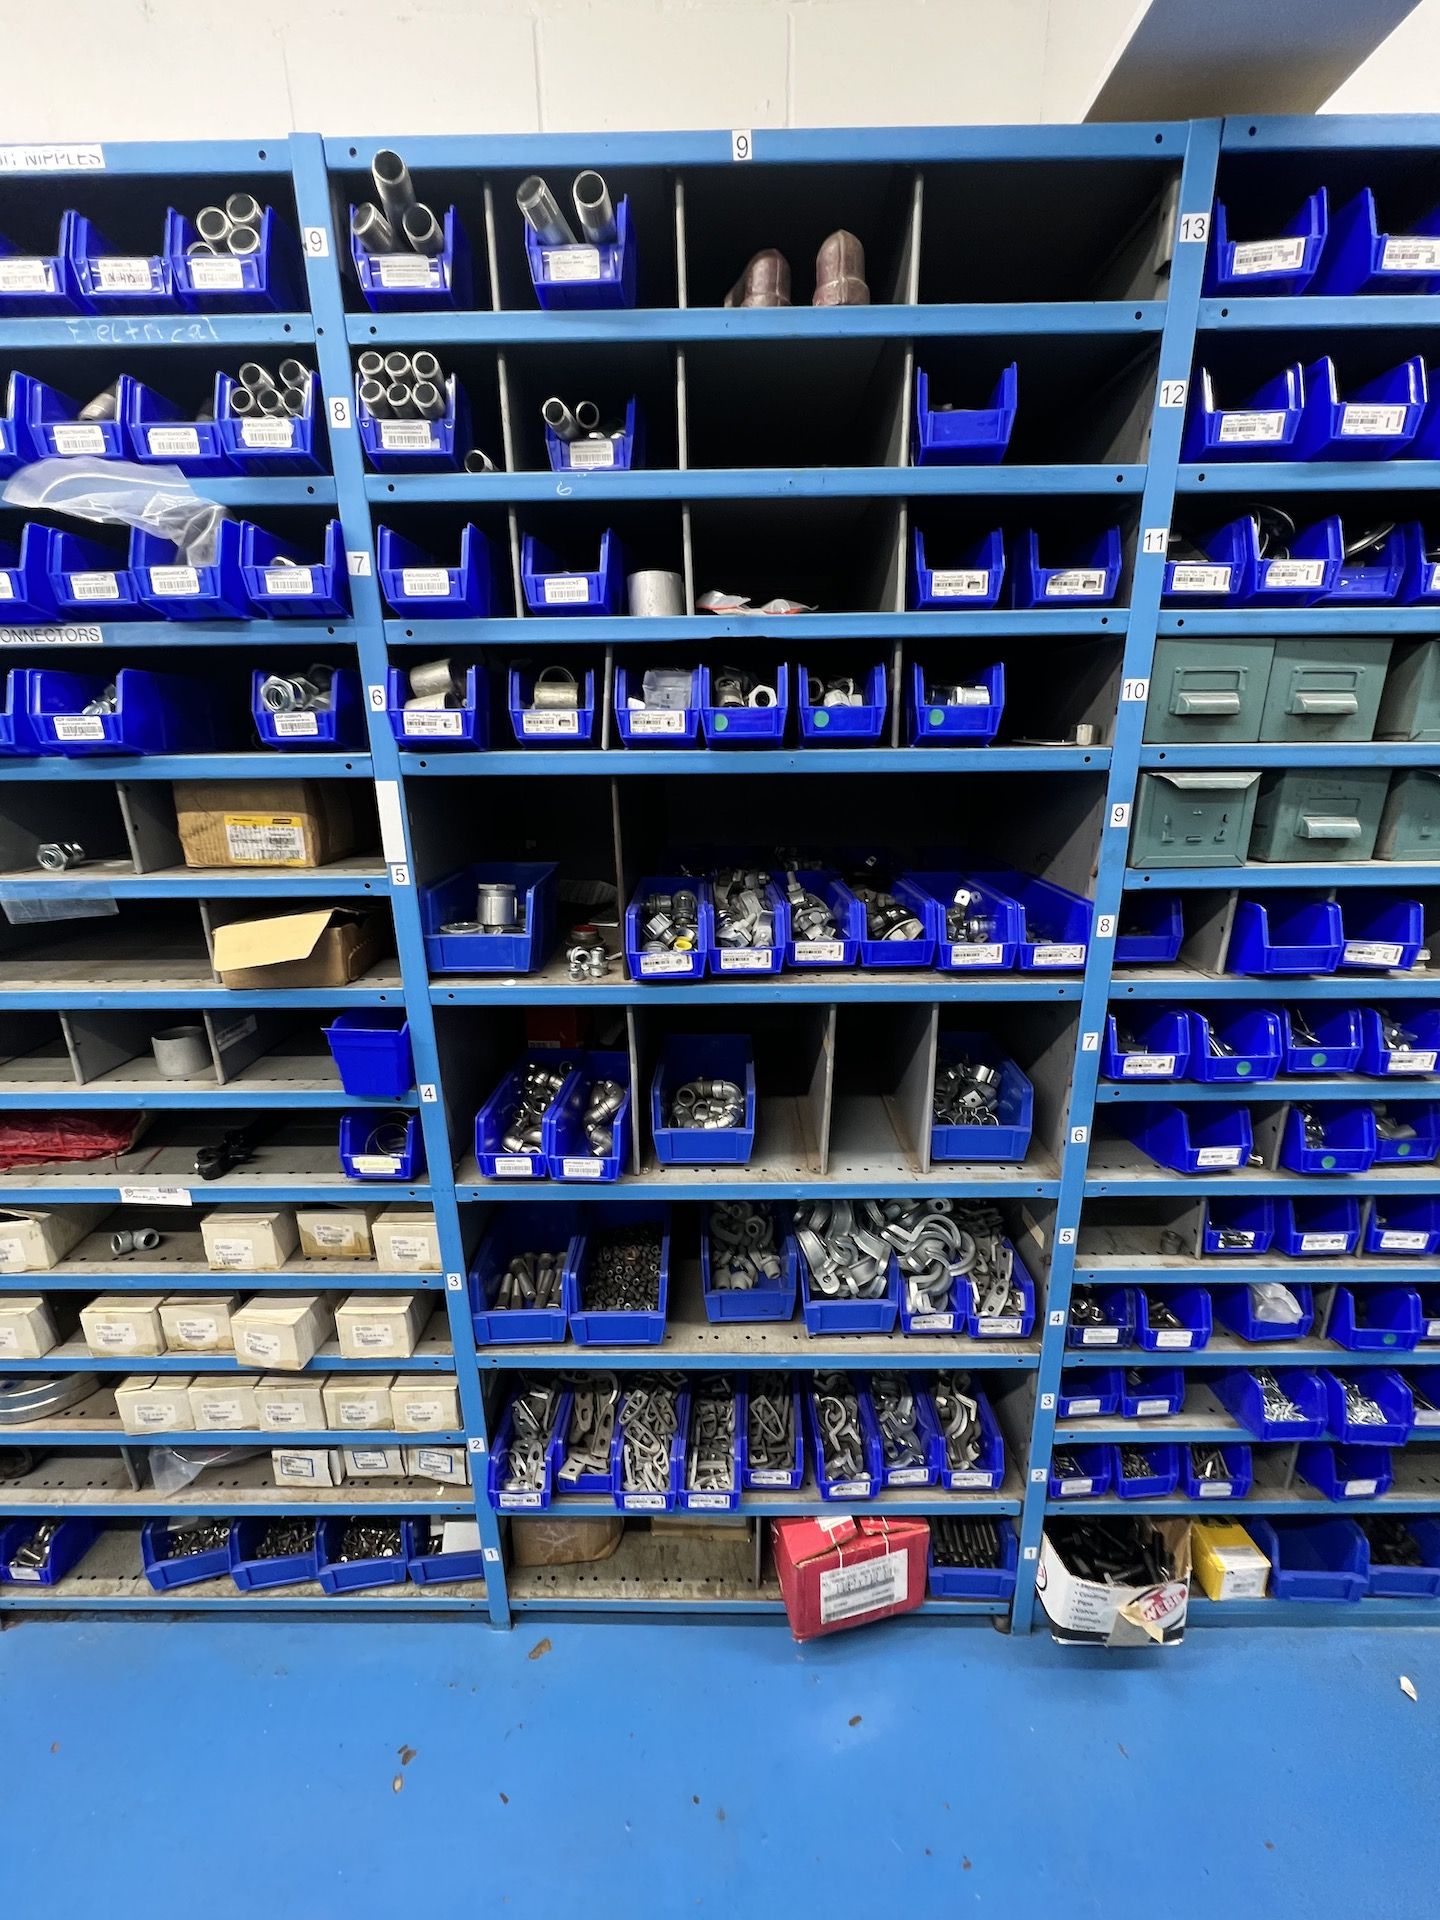 LOT OF ASSORTED PLUMBING FITTINGS, INCLUDES ELBOWS, COUPLINGS, UNIONS, ADAPTERS, AND MUCH MORE - Image 6 of 18